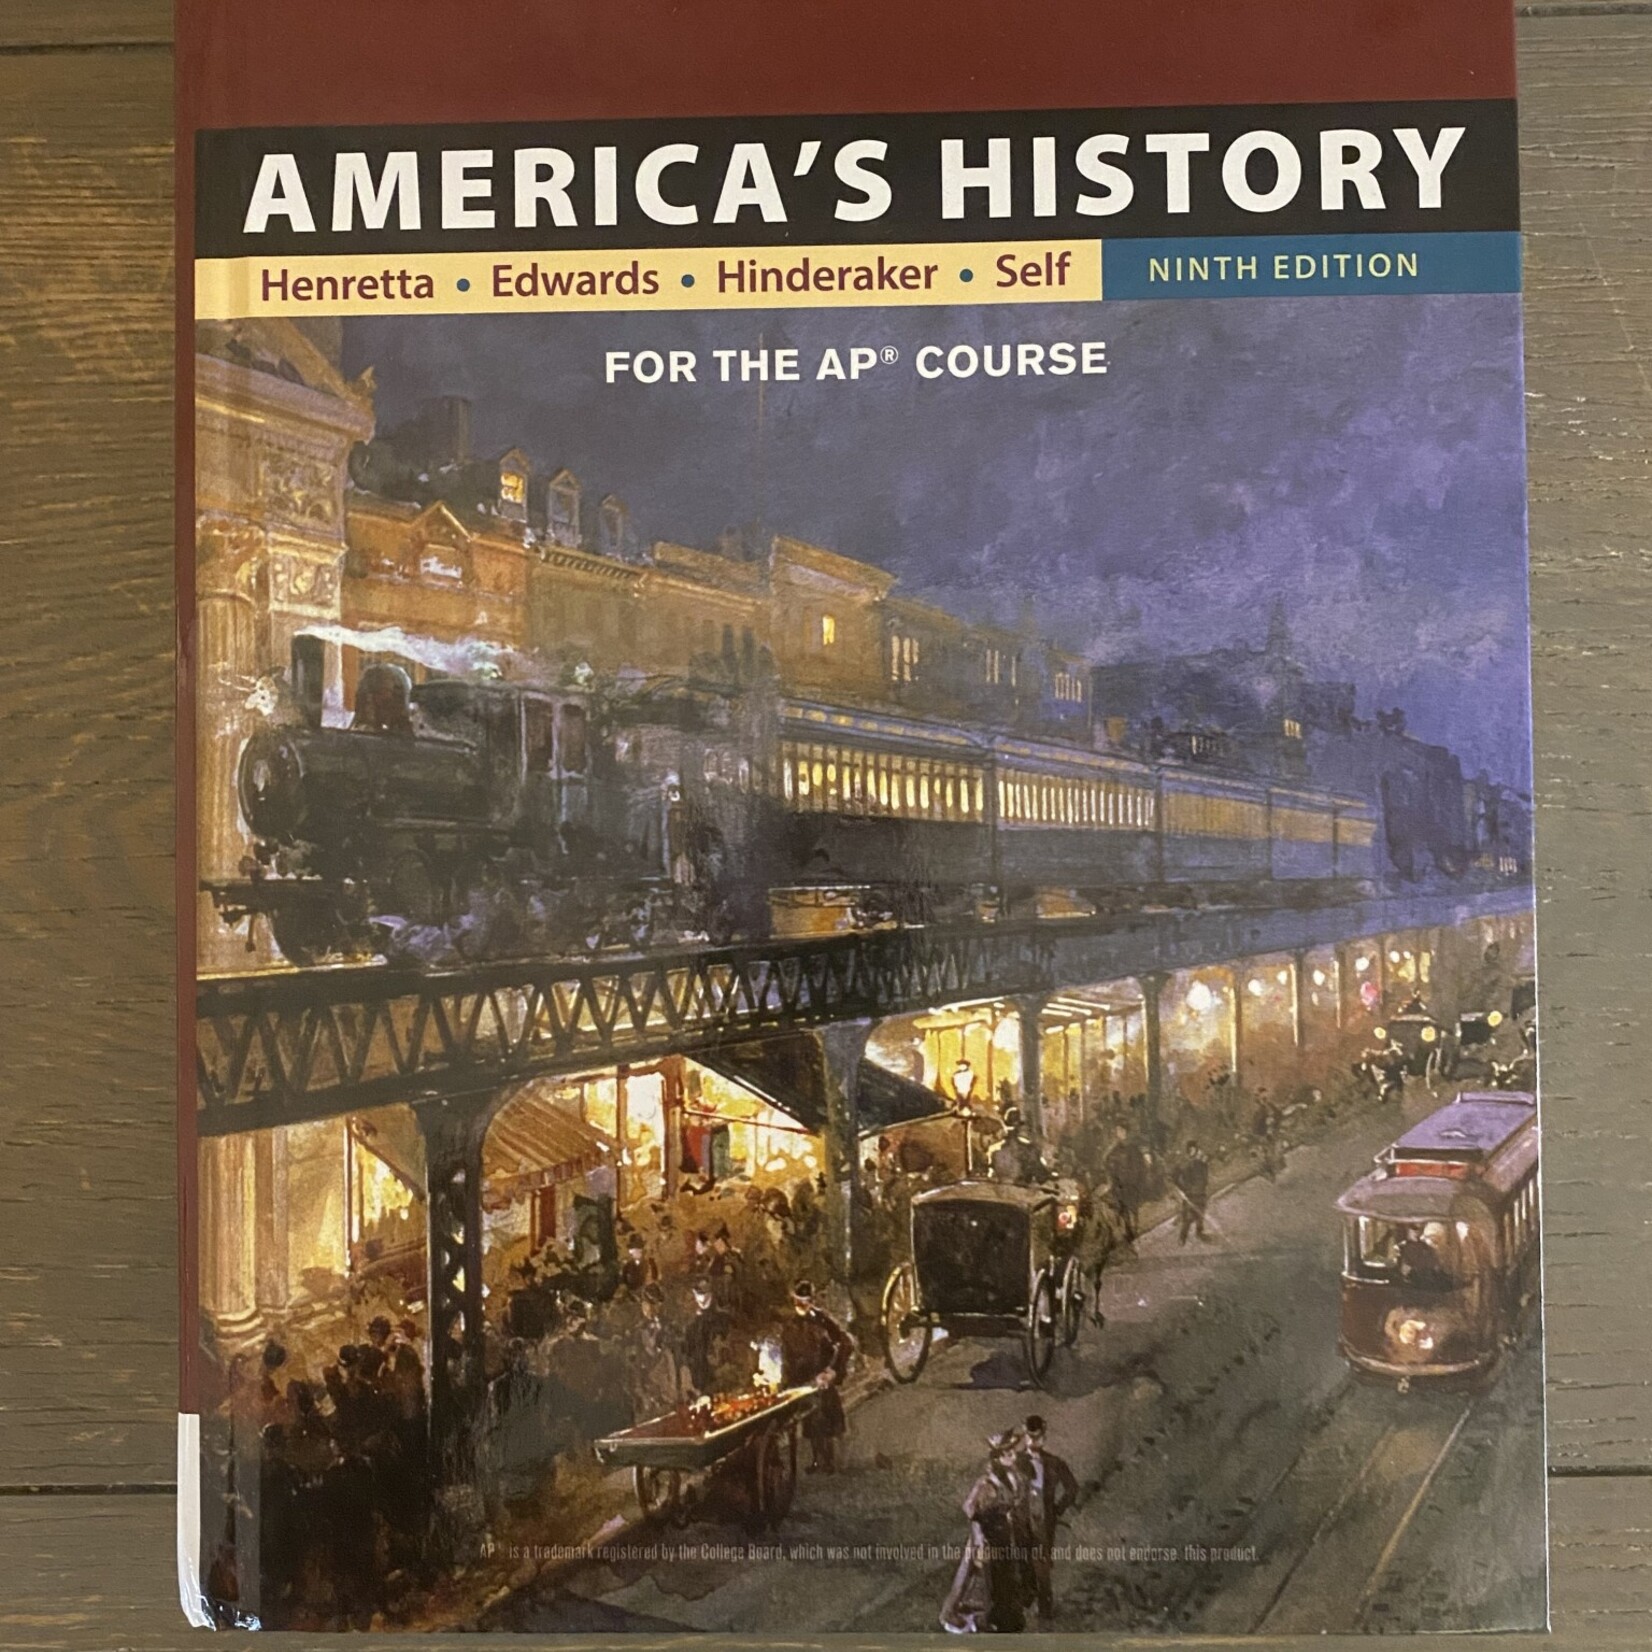 AMERICAS HISTORY for the AP Course 9E USED